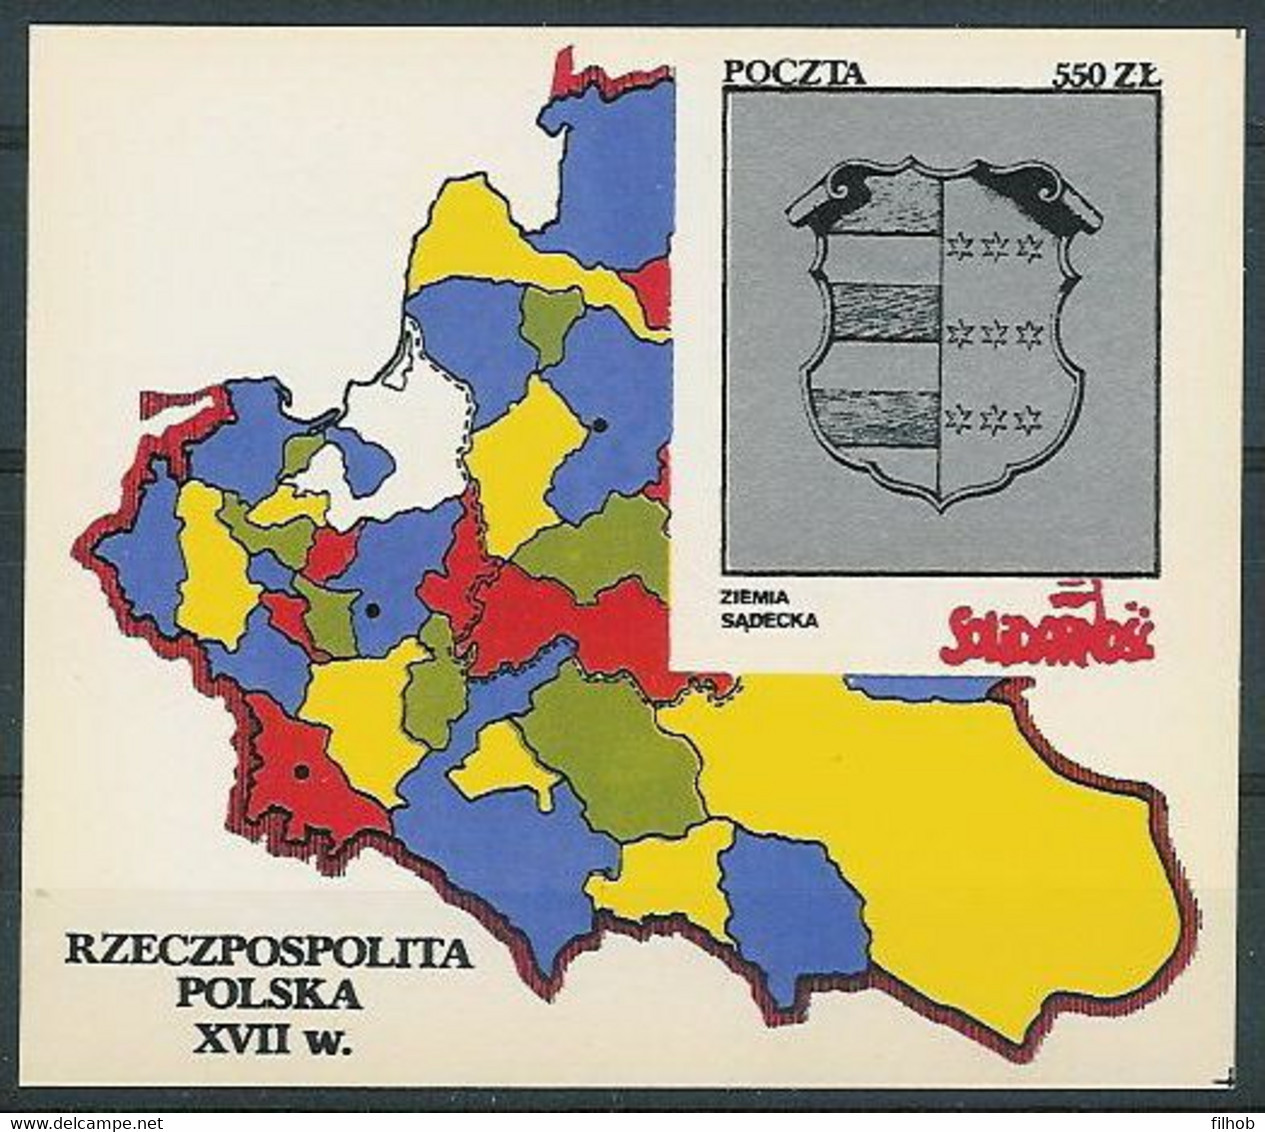 Poland SOLIDARITY (S296): Poland In The Seventeenth Century Earth Sadecka Crest Map - Solidarnosc Labels